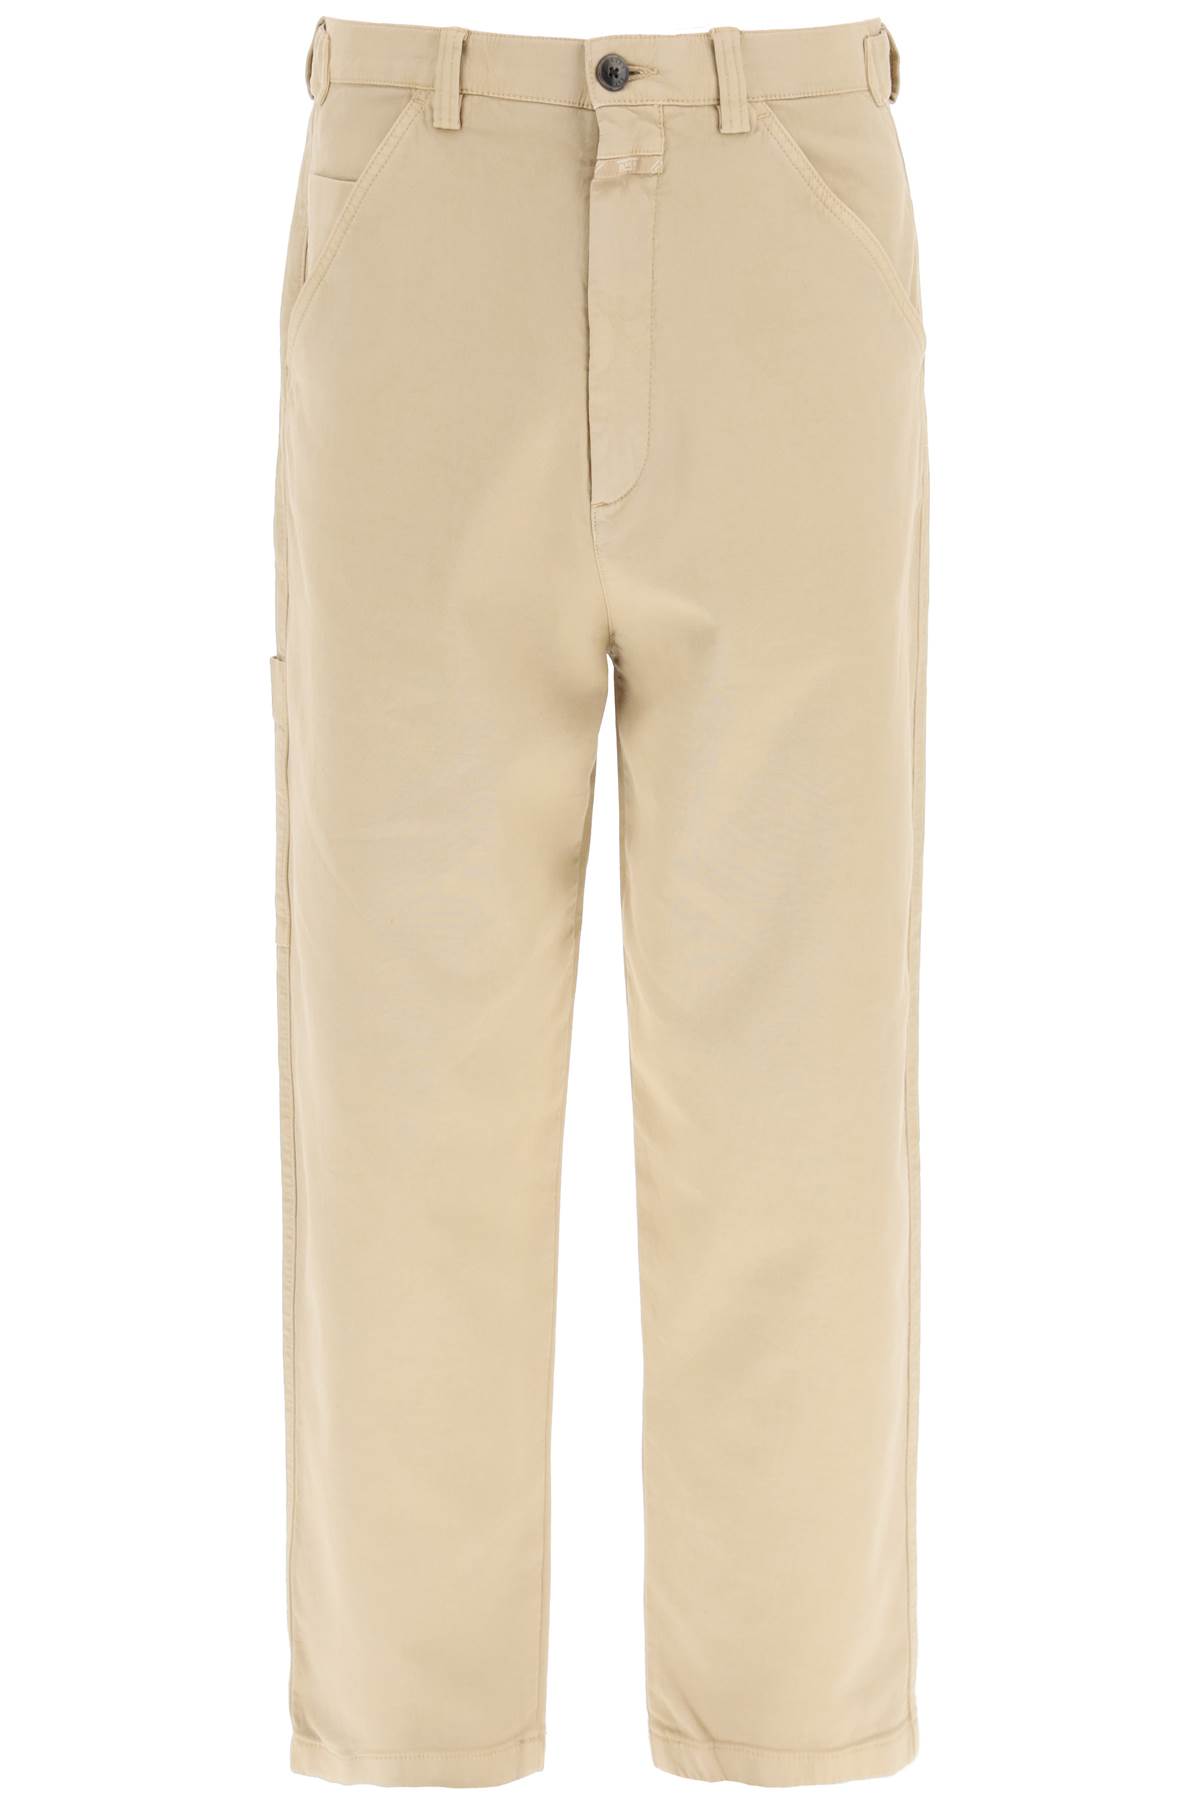 CLOSED DOVER TROUSERS